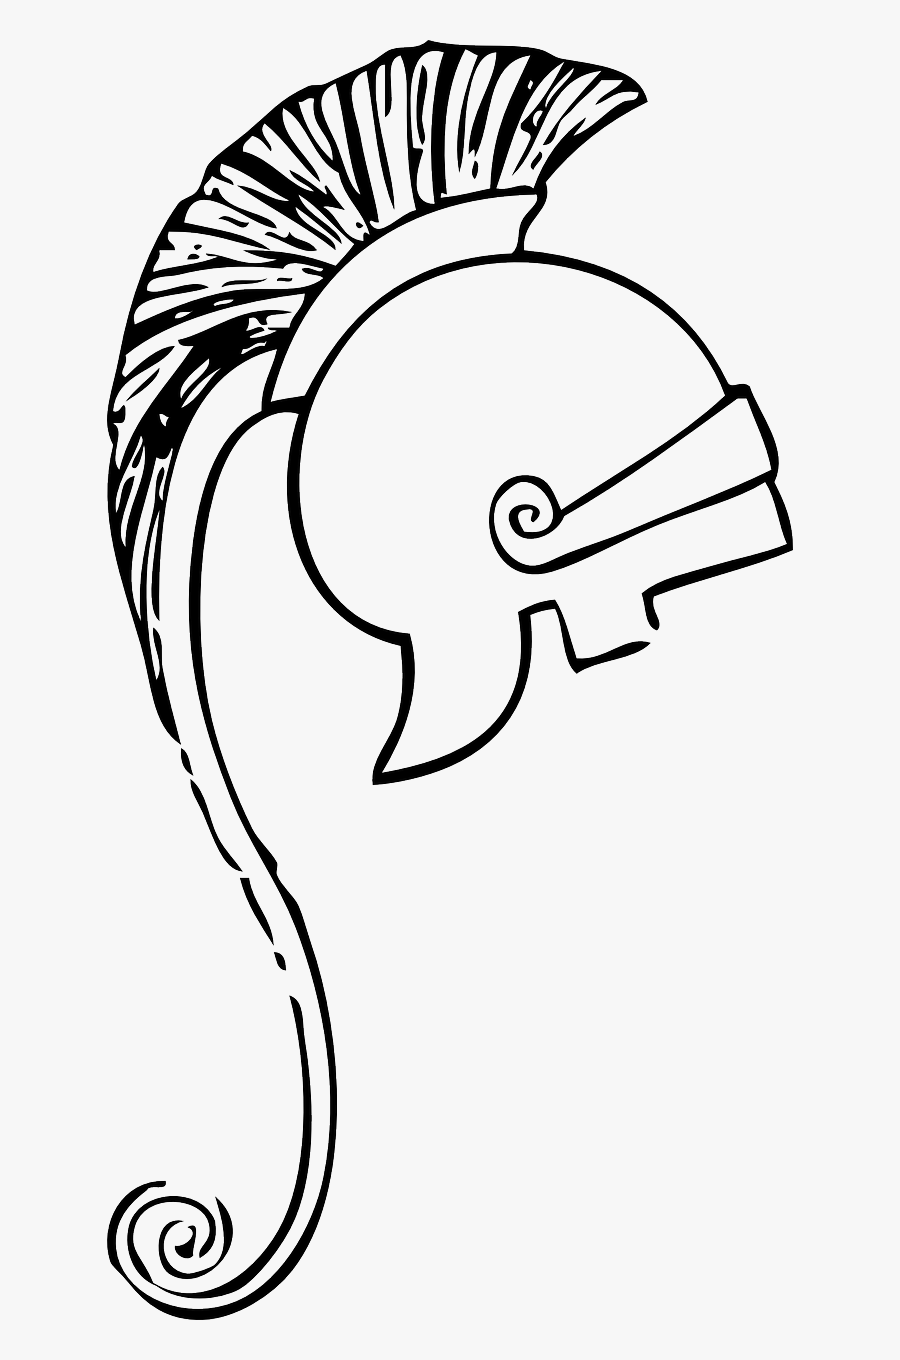 Easy Ancient Greece Drawings, Transparent Clipart